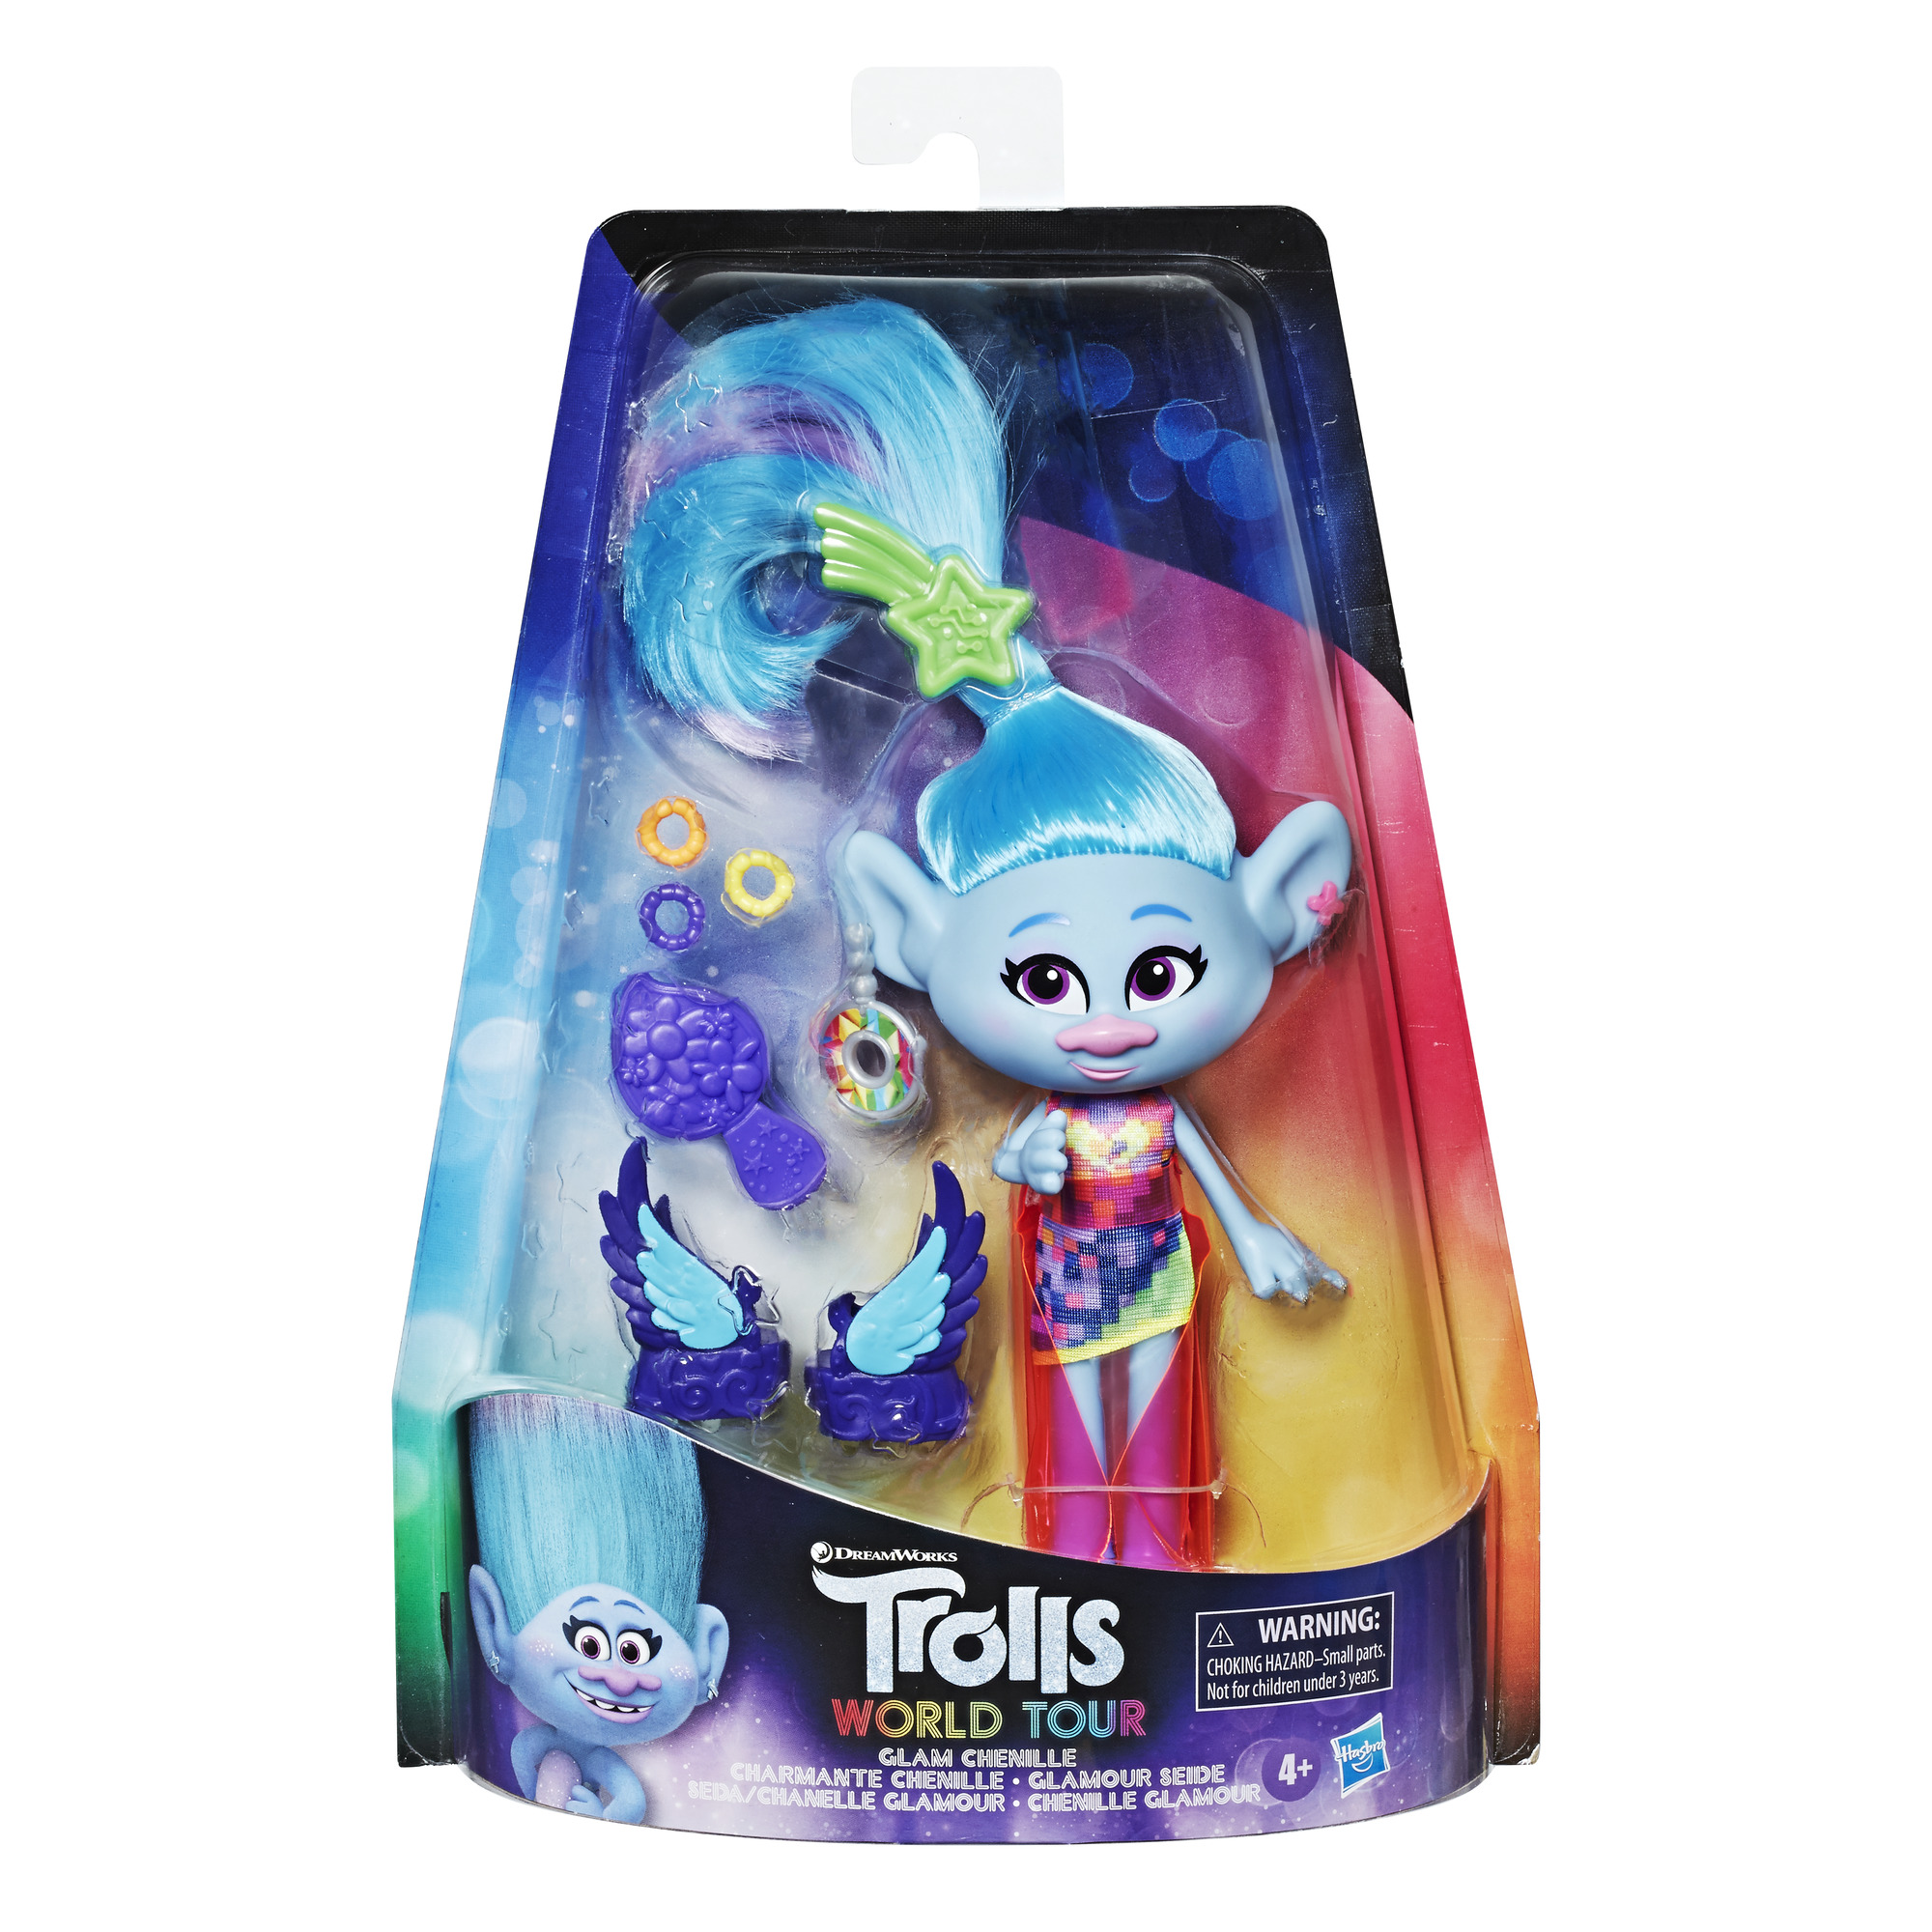 DreamWorks Trolls Glam Chenille Fashion Doll, Includes Dress and Shoes - image 2 of 11